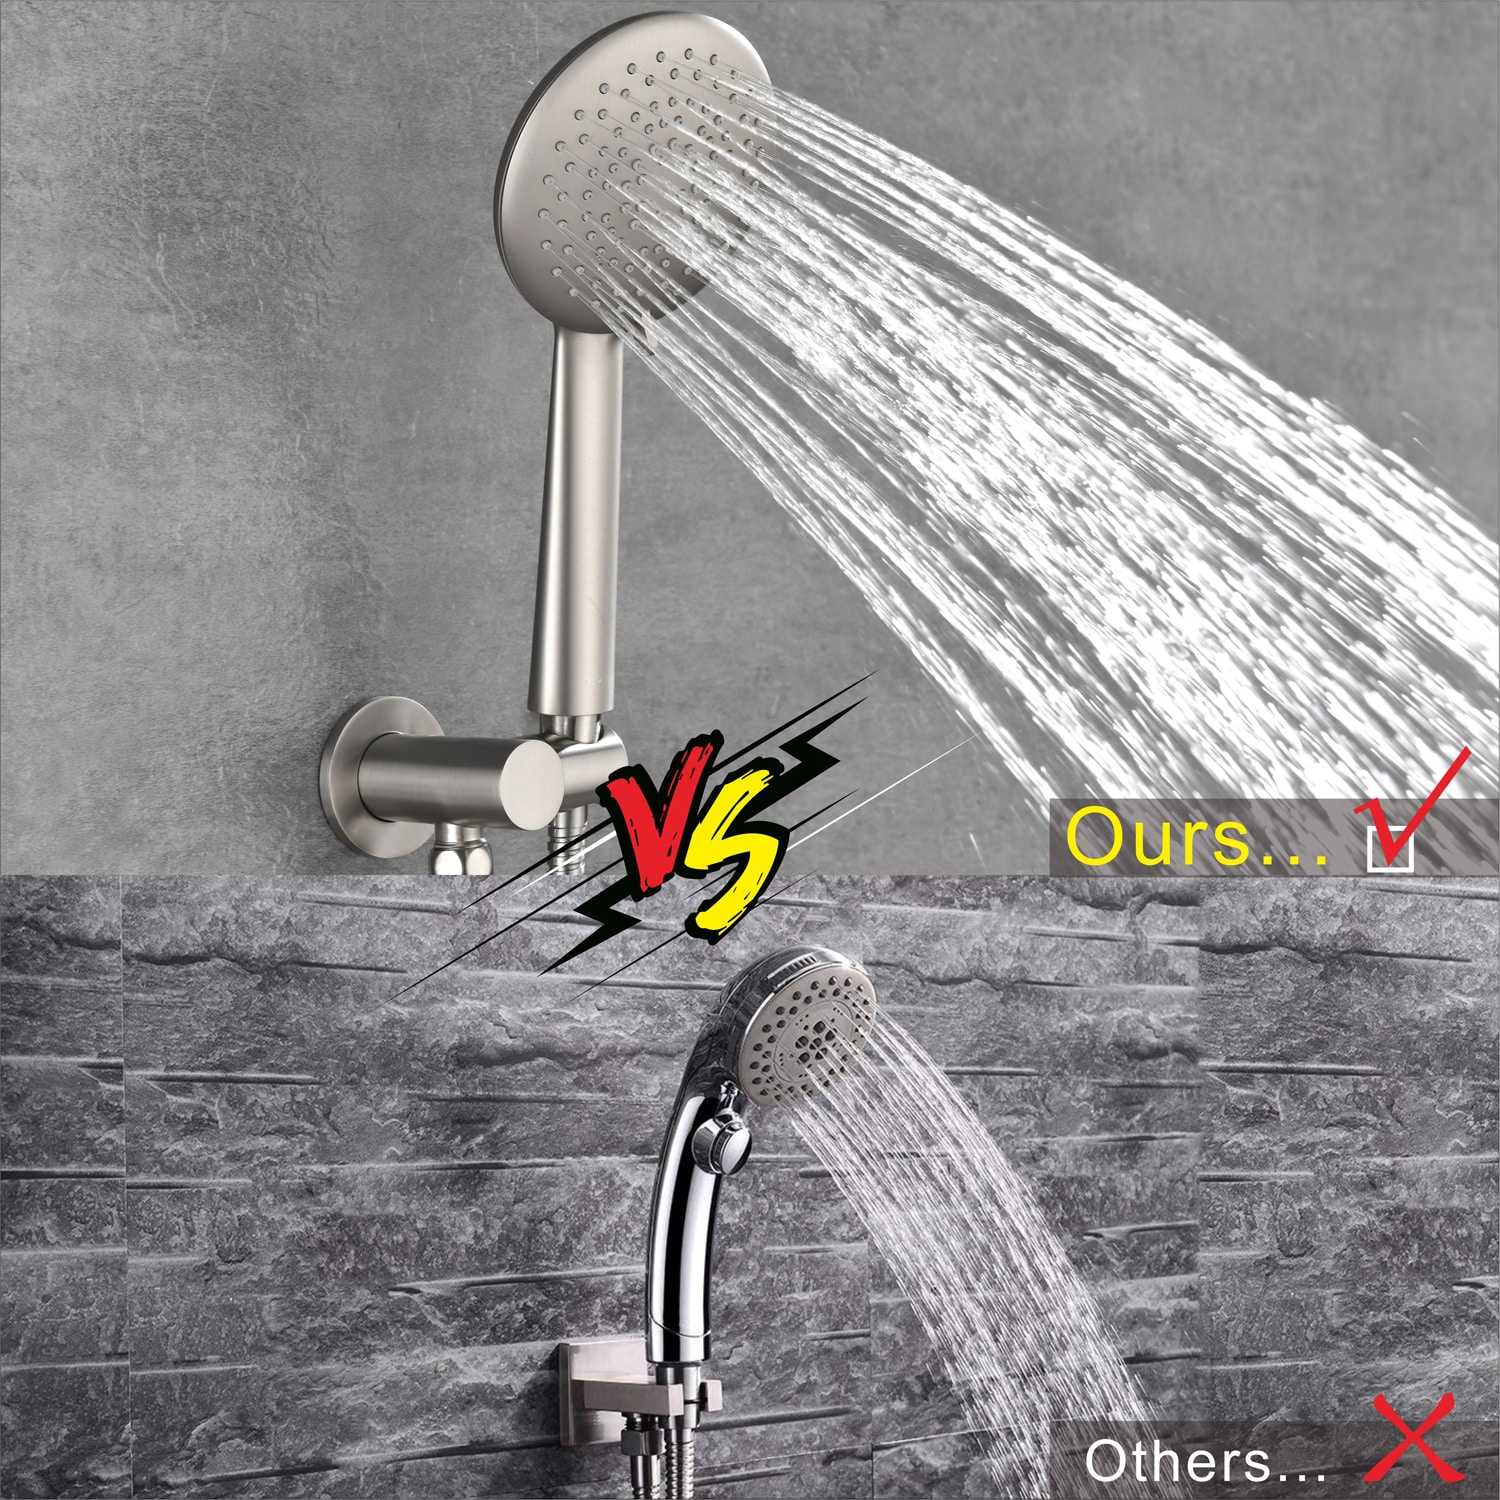 Pouuin Ob Brushed Nickel Waterfall Built-In Shower Faucet System 